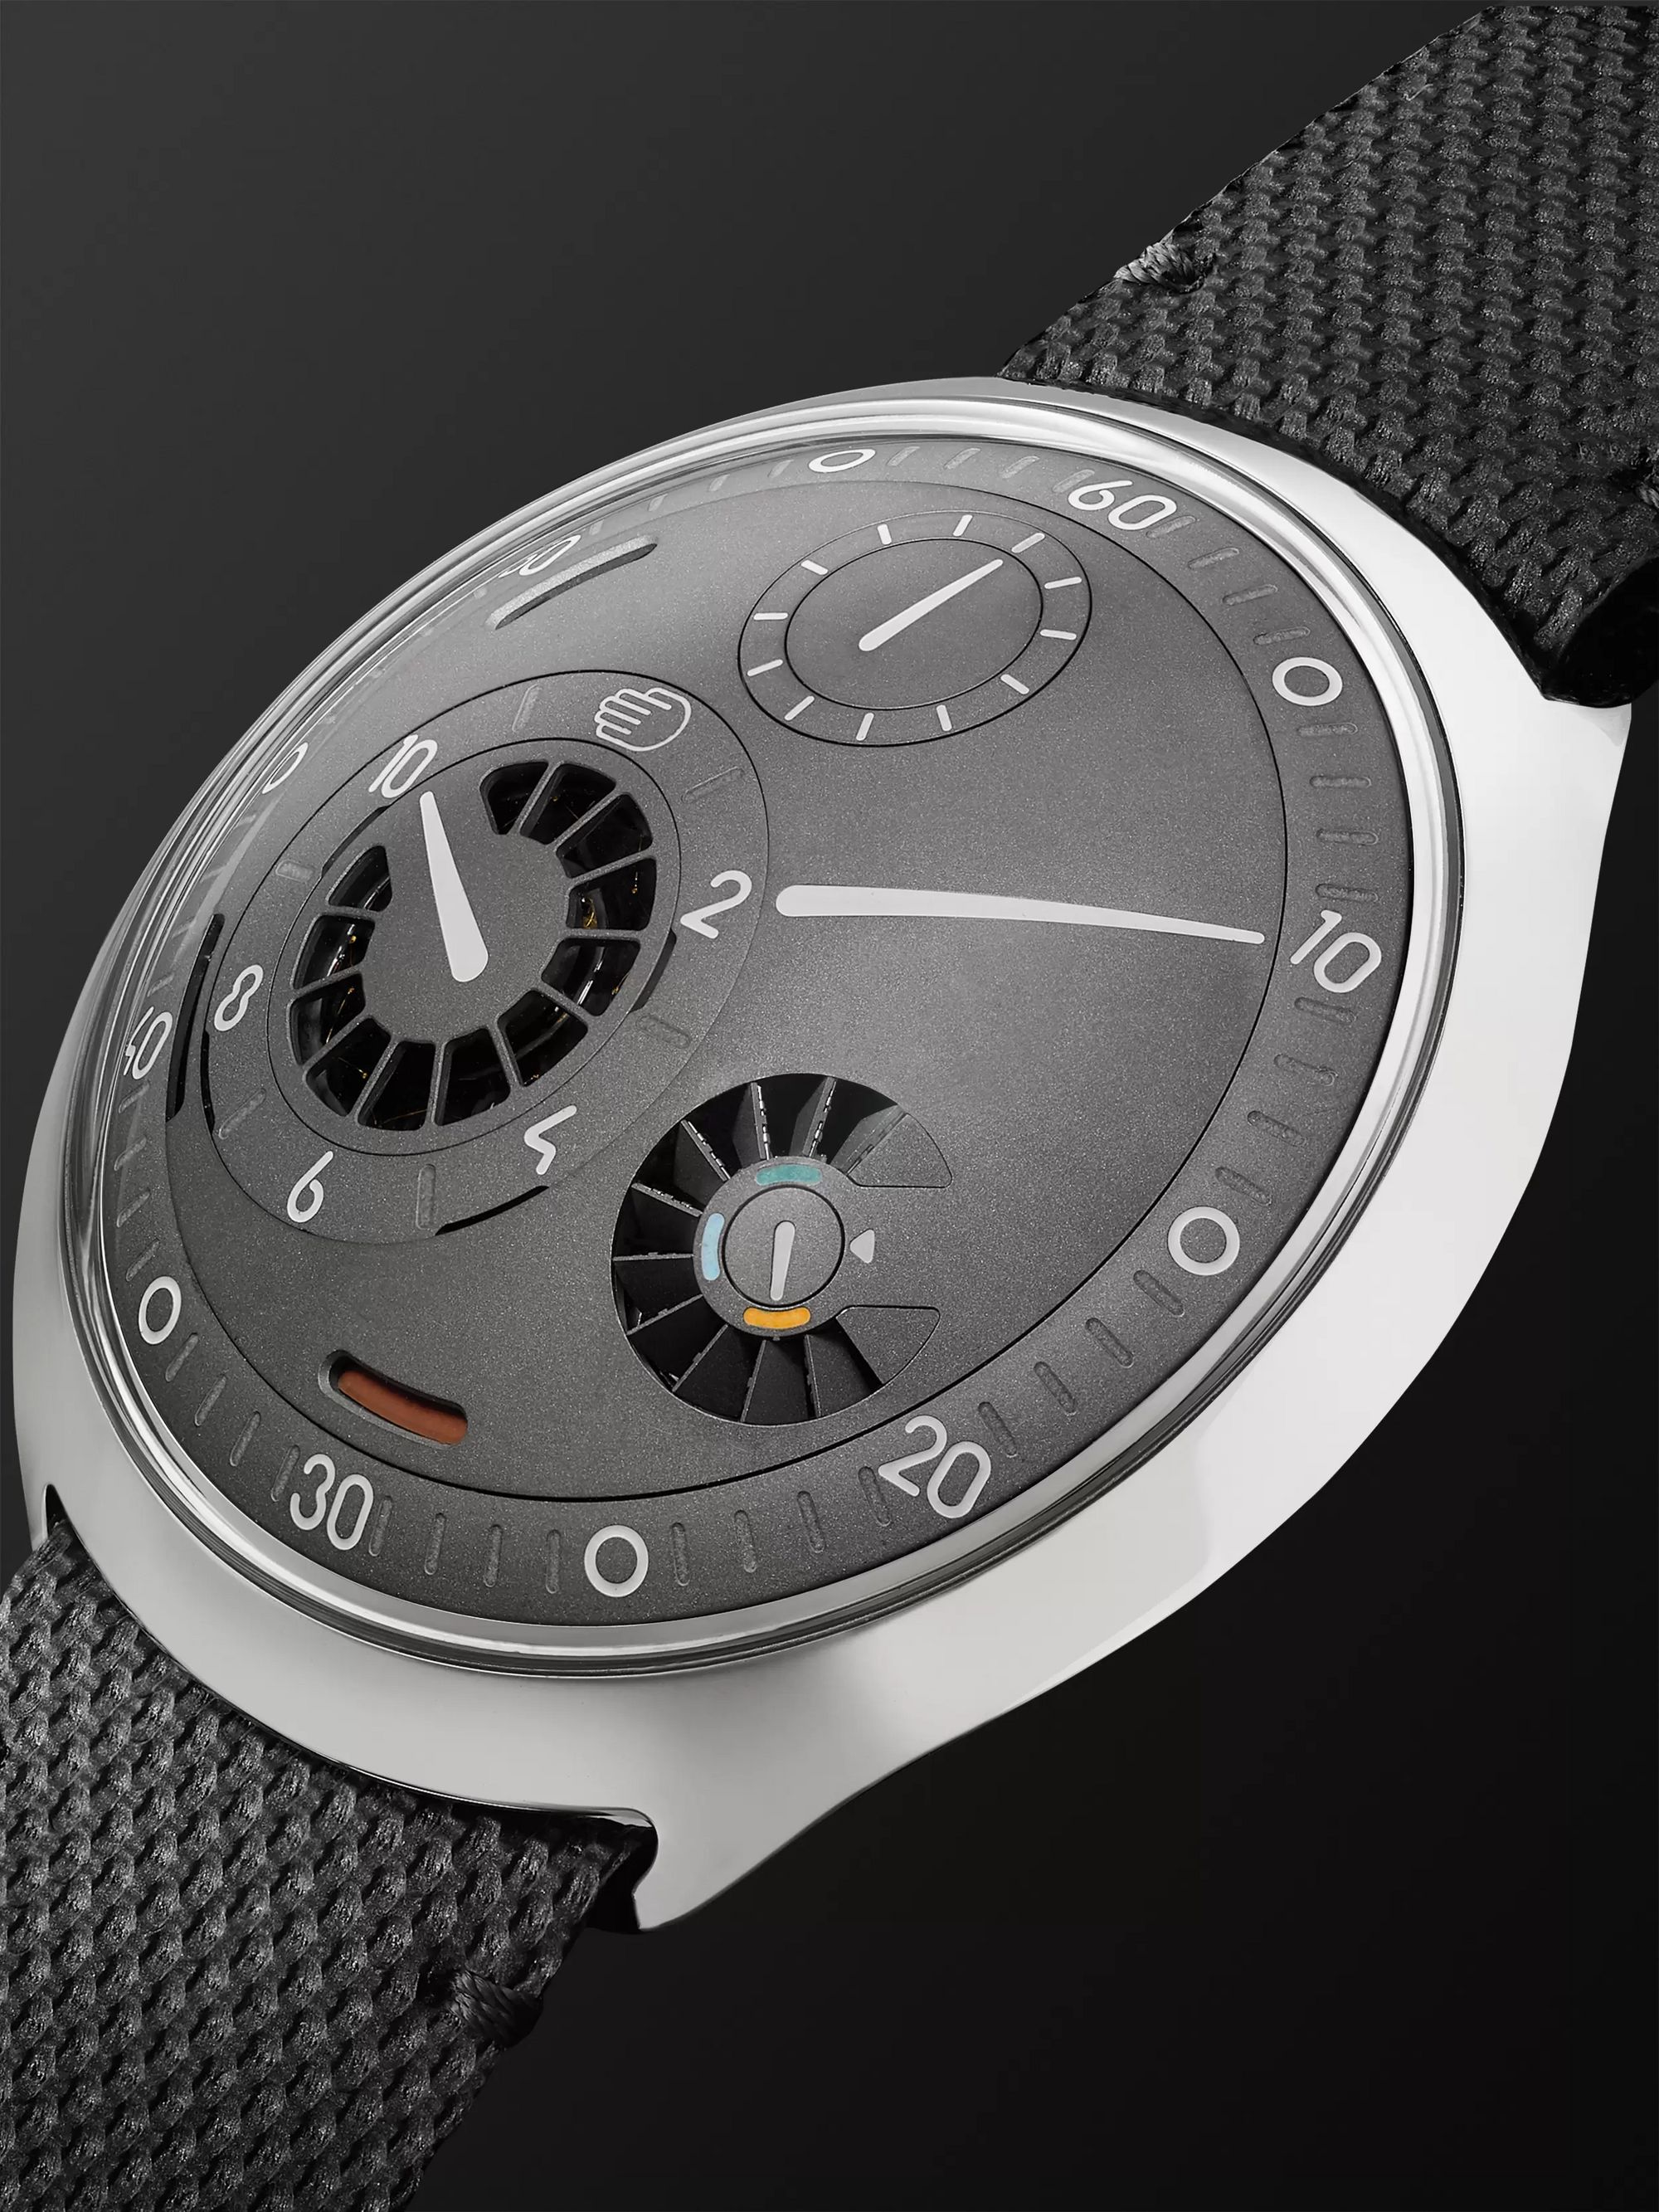 RESSENCE Type 2G Automatic 45mm Titanium and Leather Watch with Smart Crown Technology